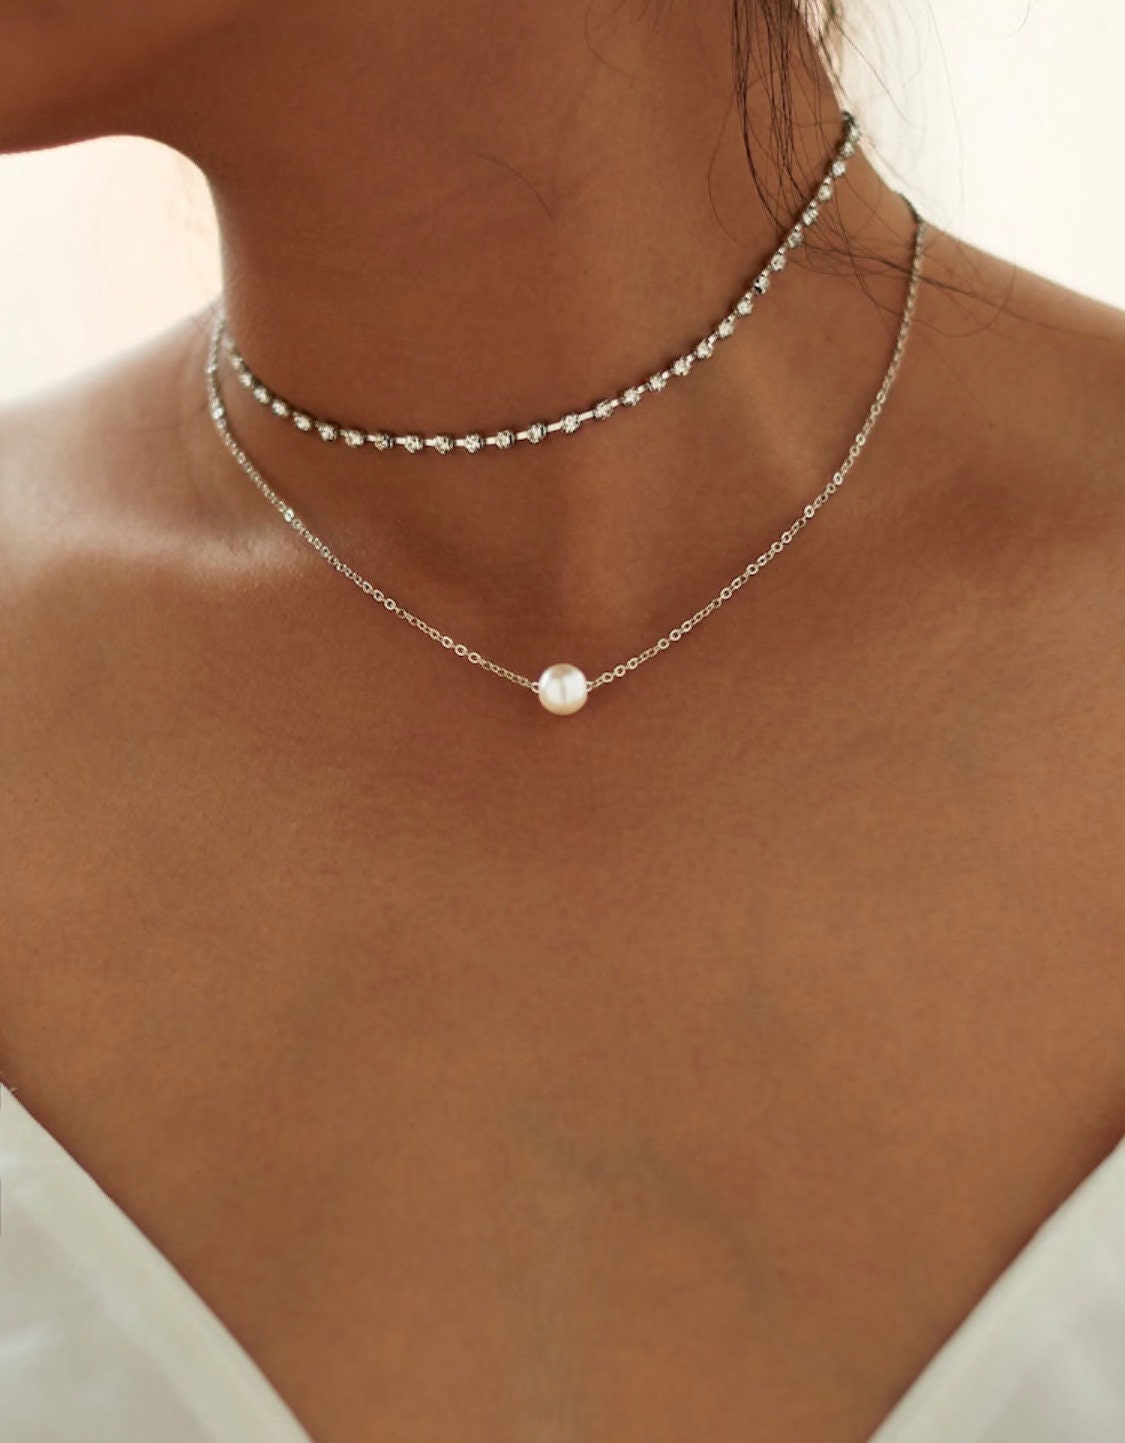 2 piece Rhinestone Choker and Faux Pearl Pendant Necklaces in Silver, Homecoming Jewelry, Prom Jewelry, Wedding Jewelry, Faux Diamond Choker